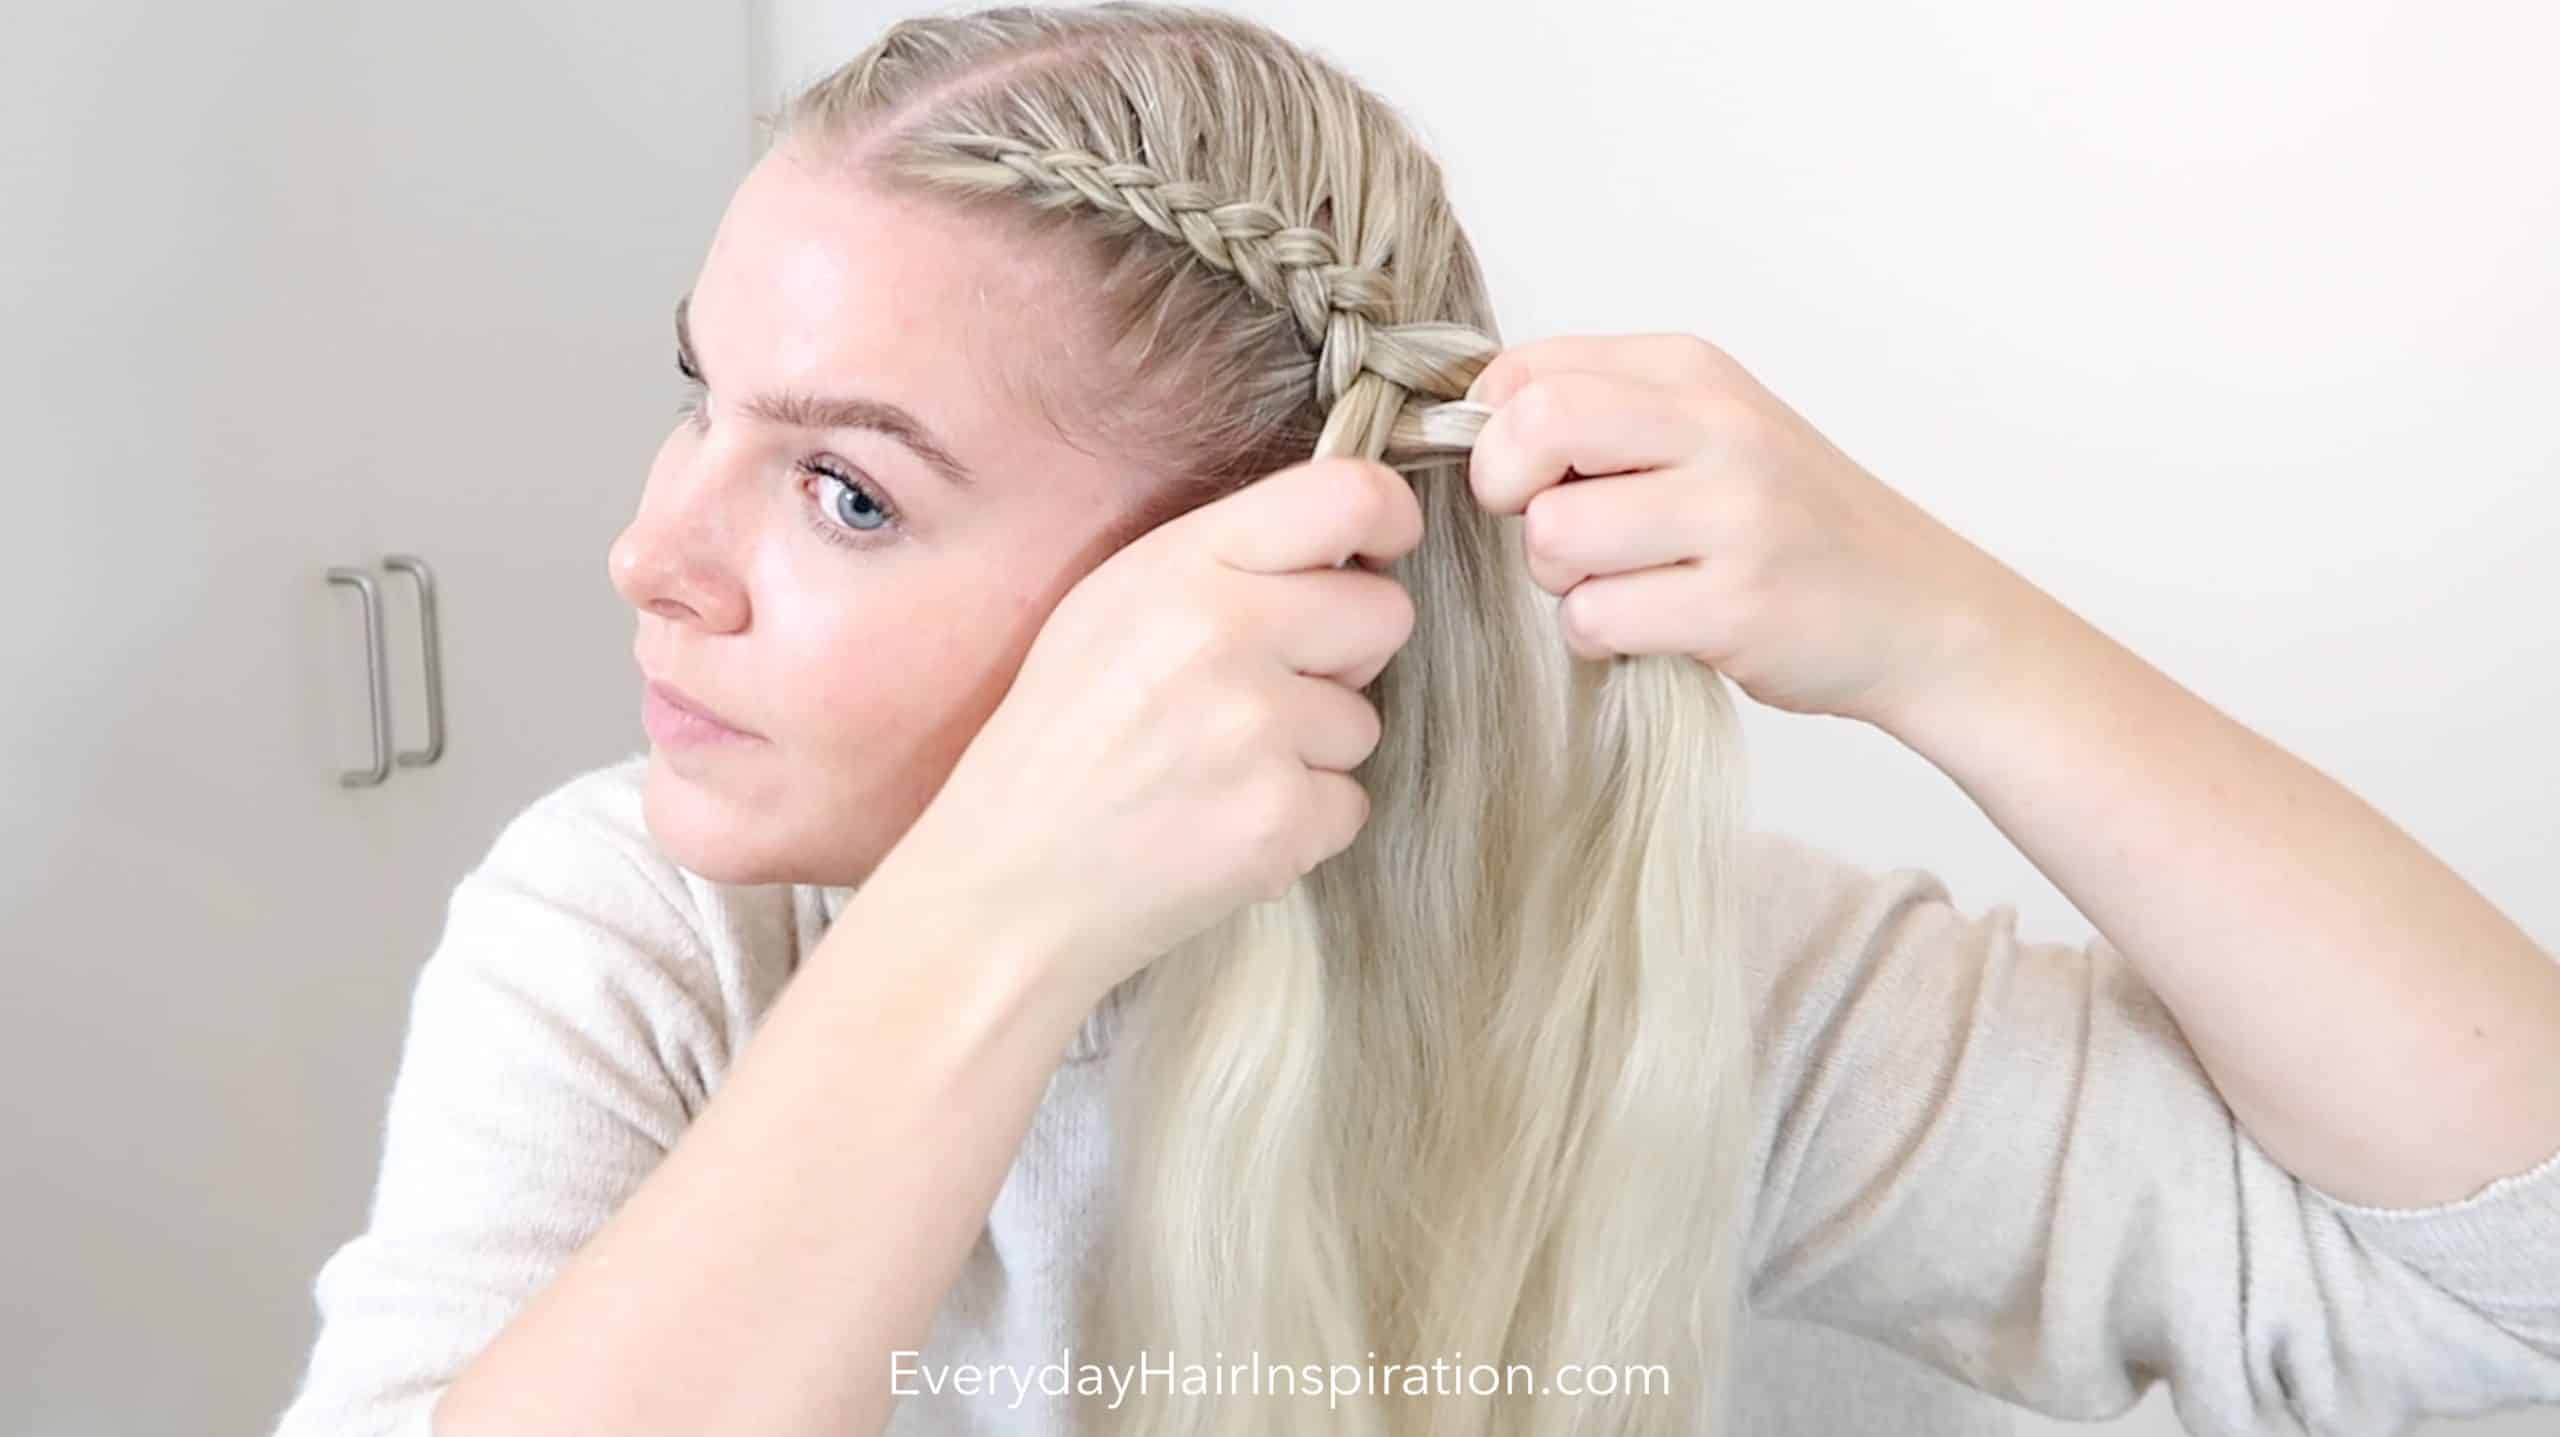 Eye-Popping Dutch Braid Hairstyles For Women To Try – kate25